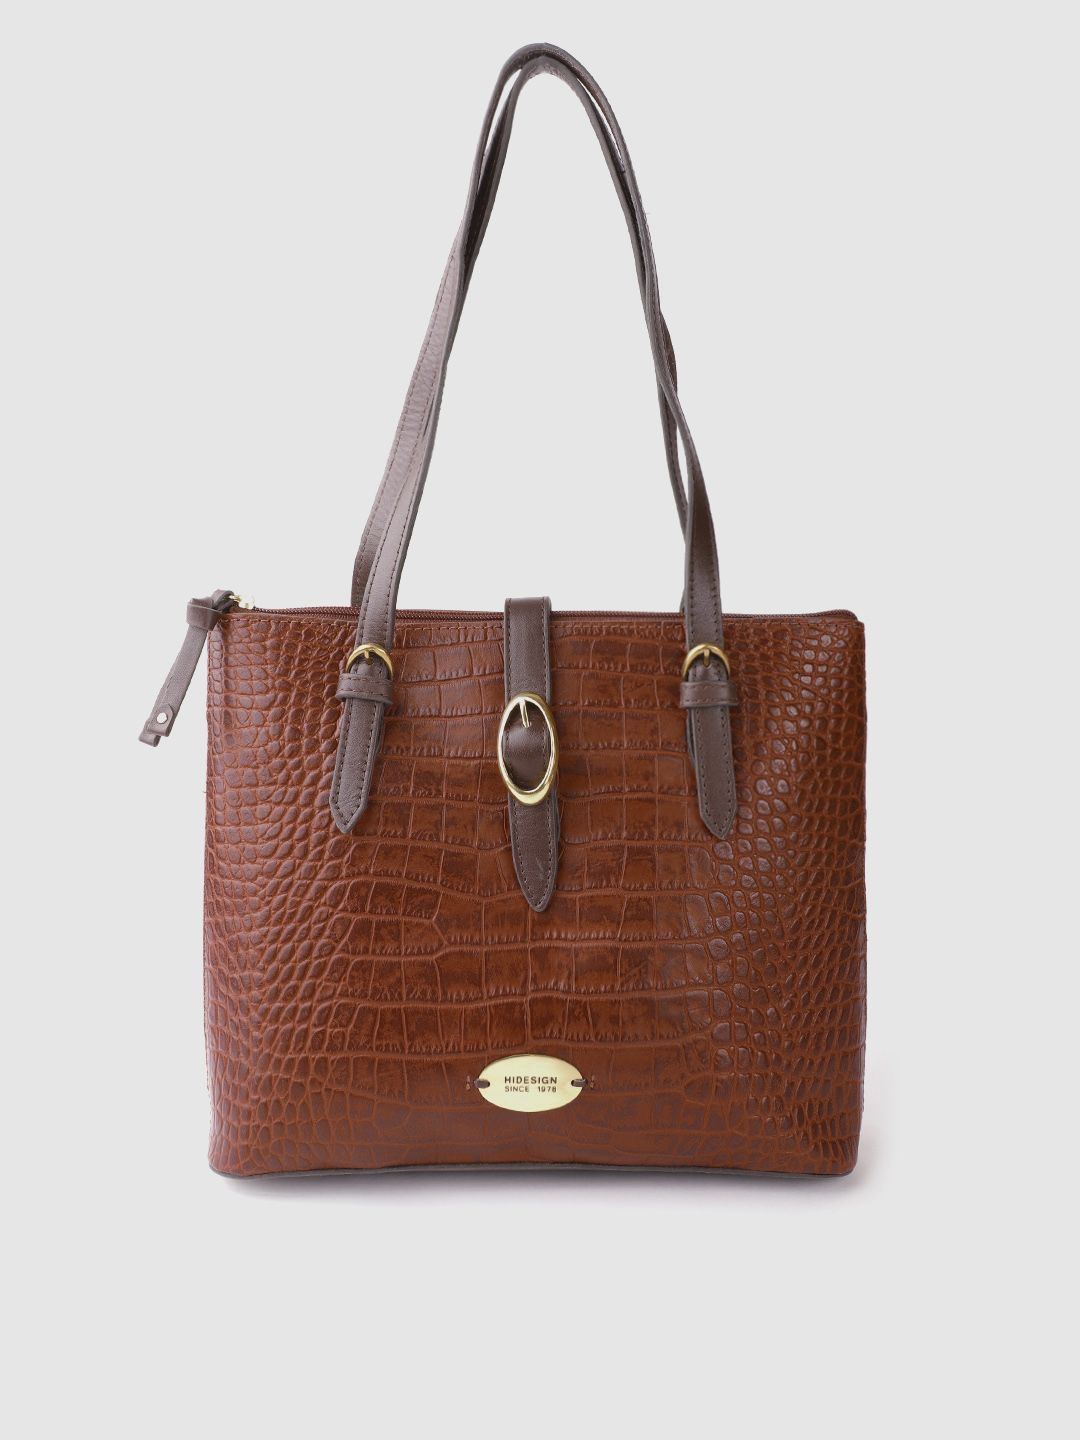 Hidesign Brown Croc Textured Leather Handcrafted Structured Shoulder Bag Price in India